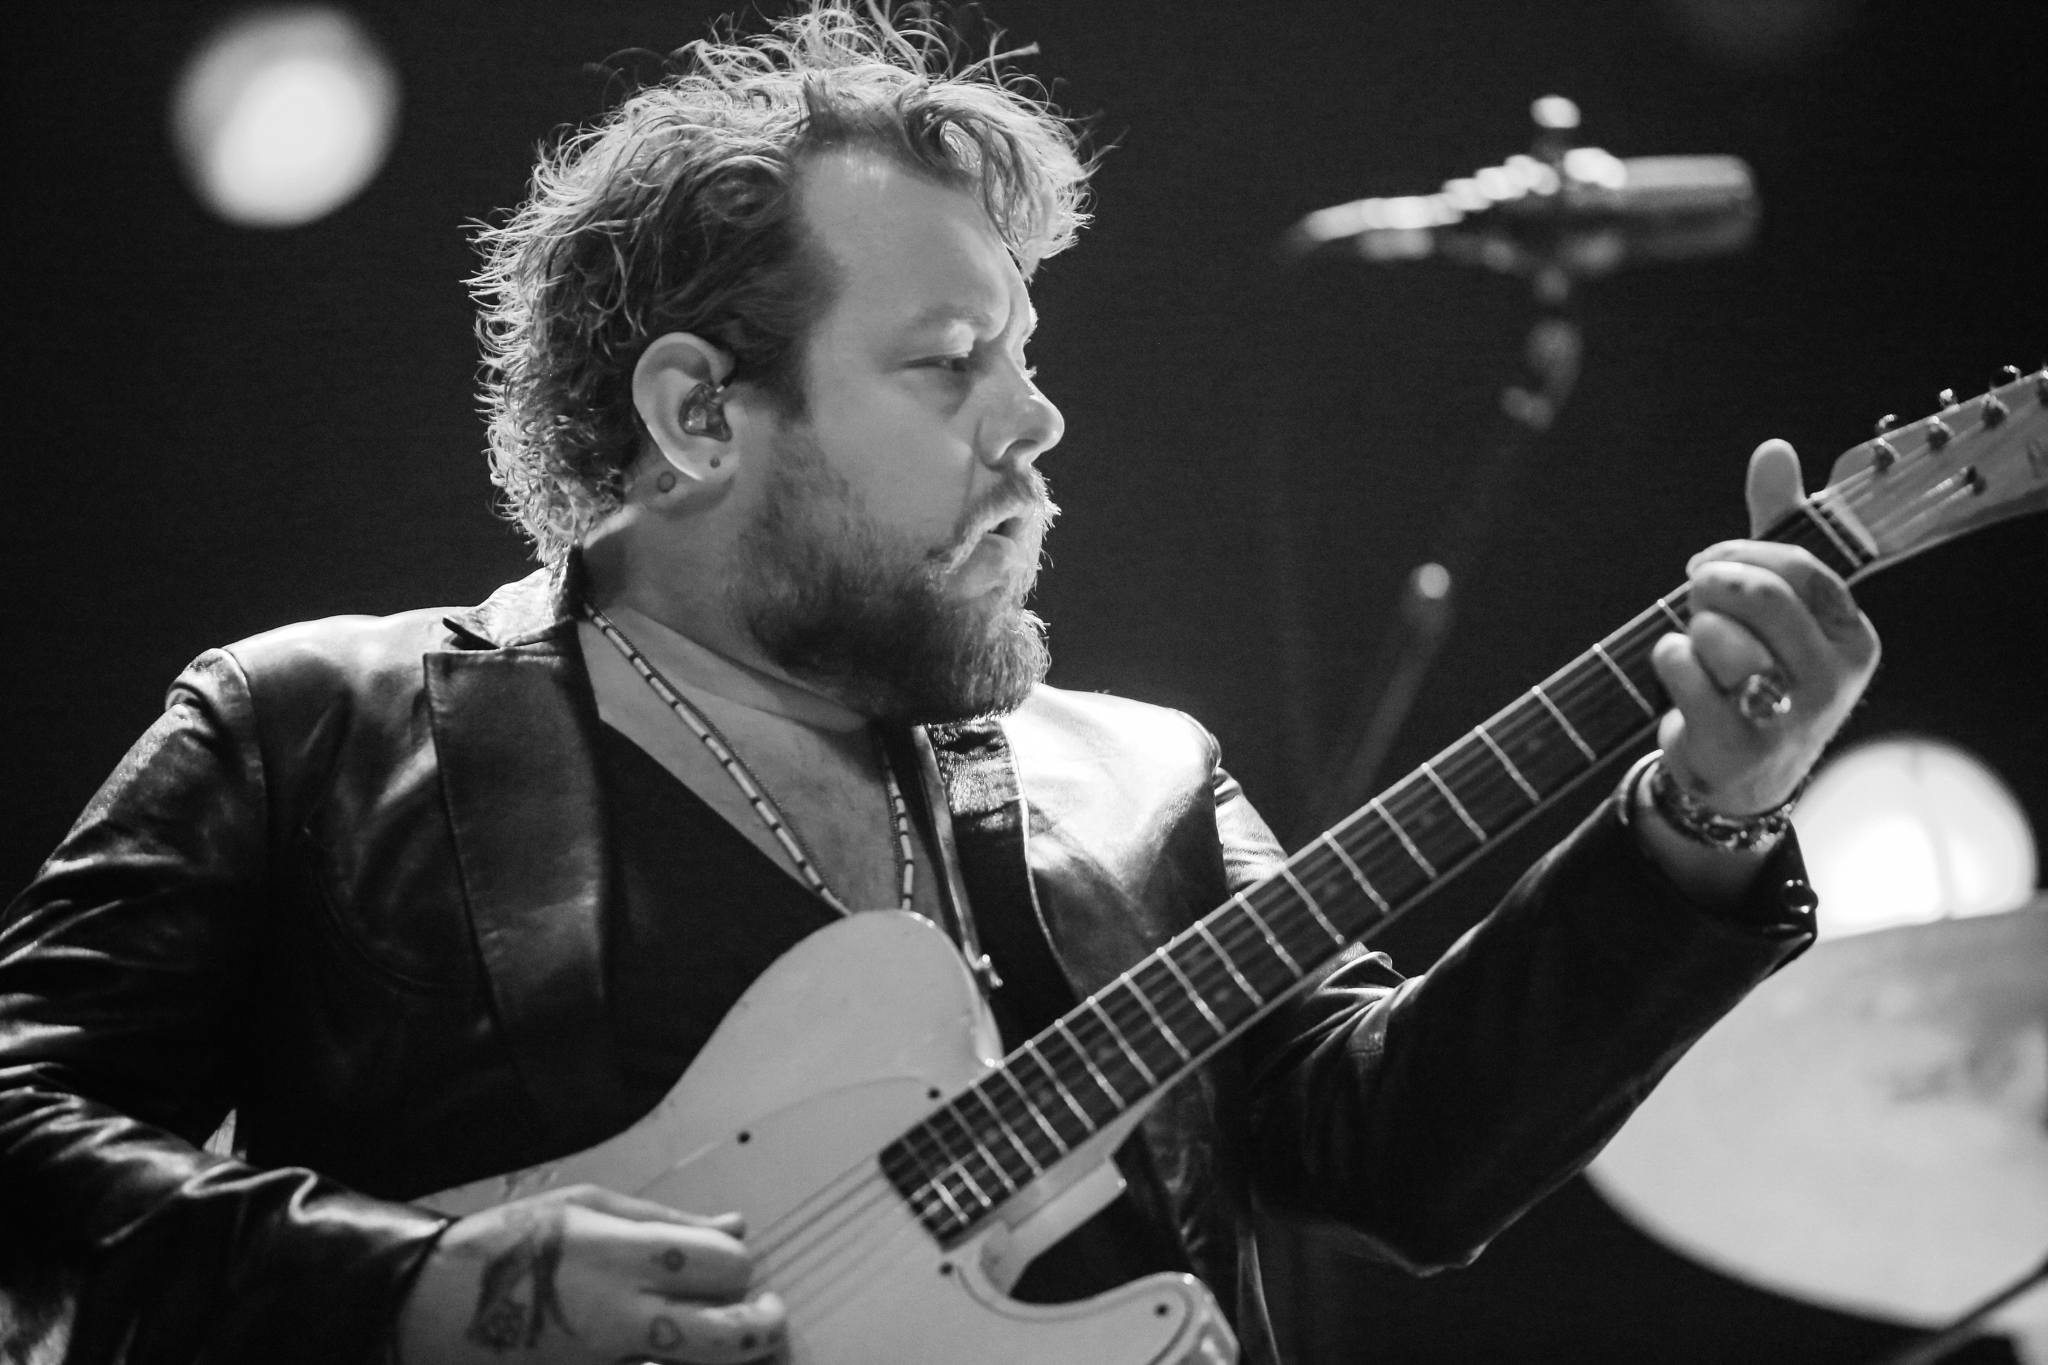 Nathaniel Rateliff and the Night Sweats play a show in Western NC with images by Light Shifter Studios.